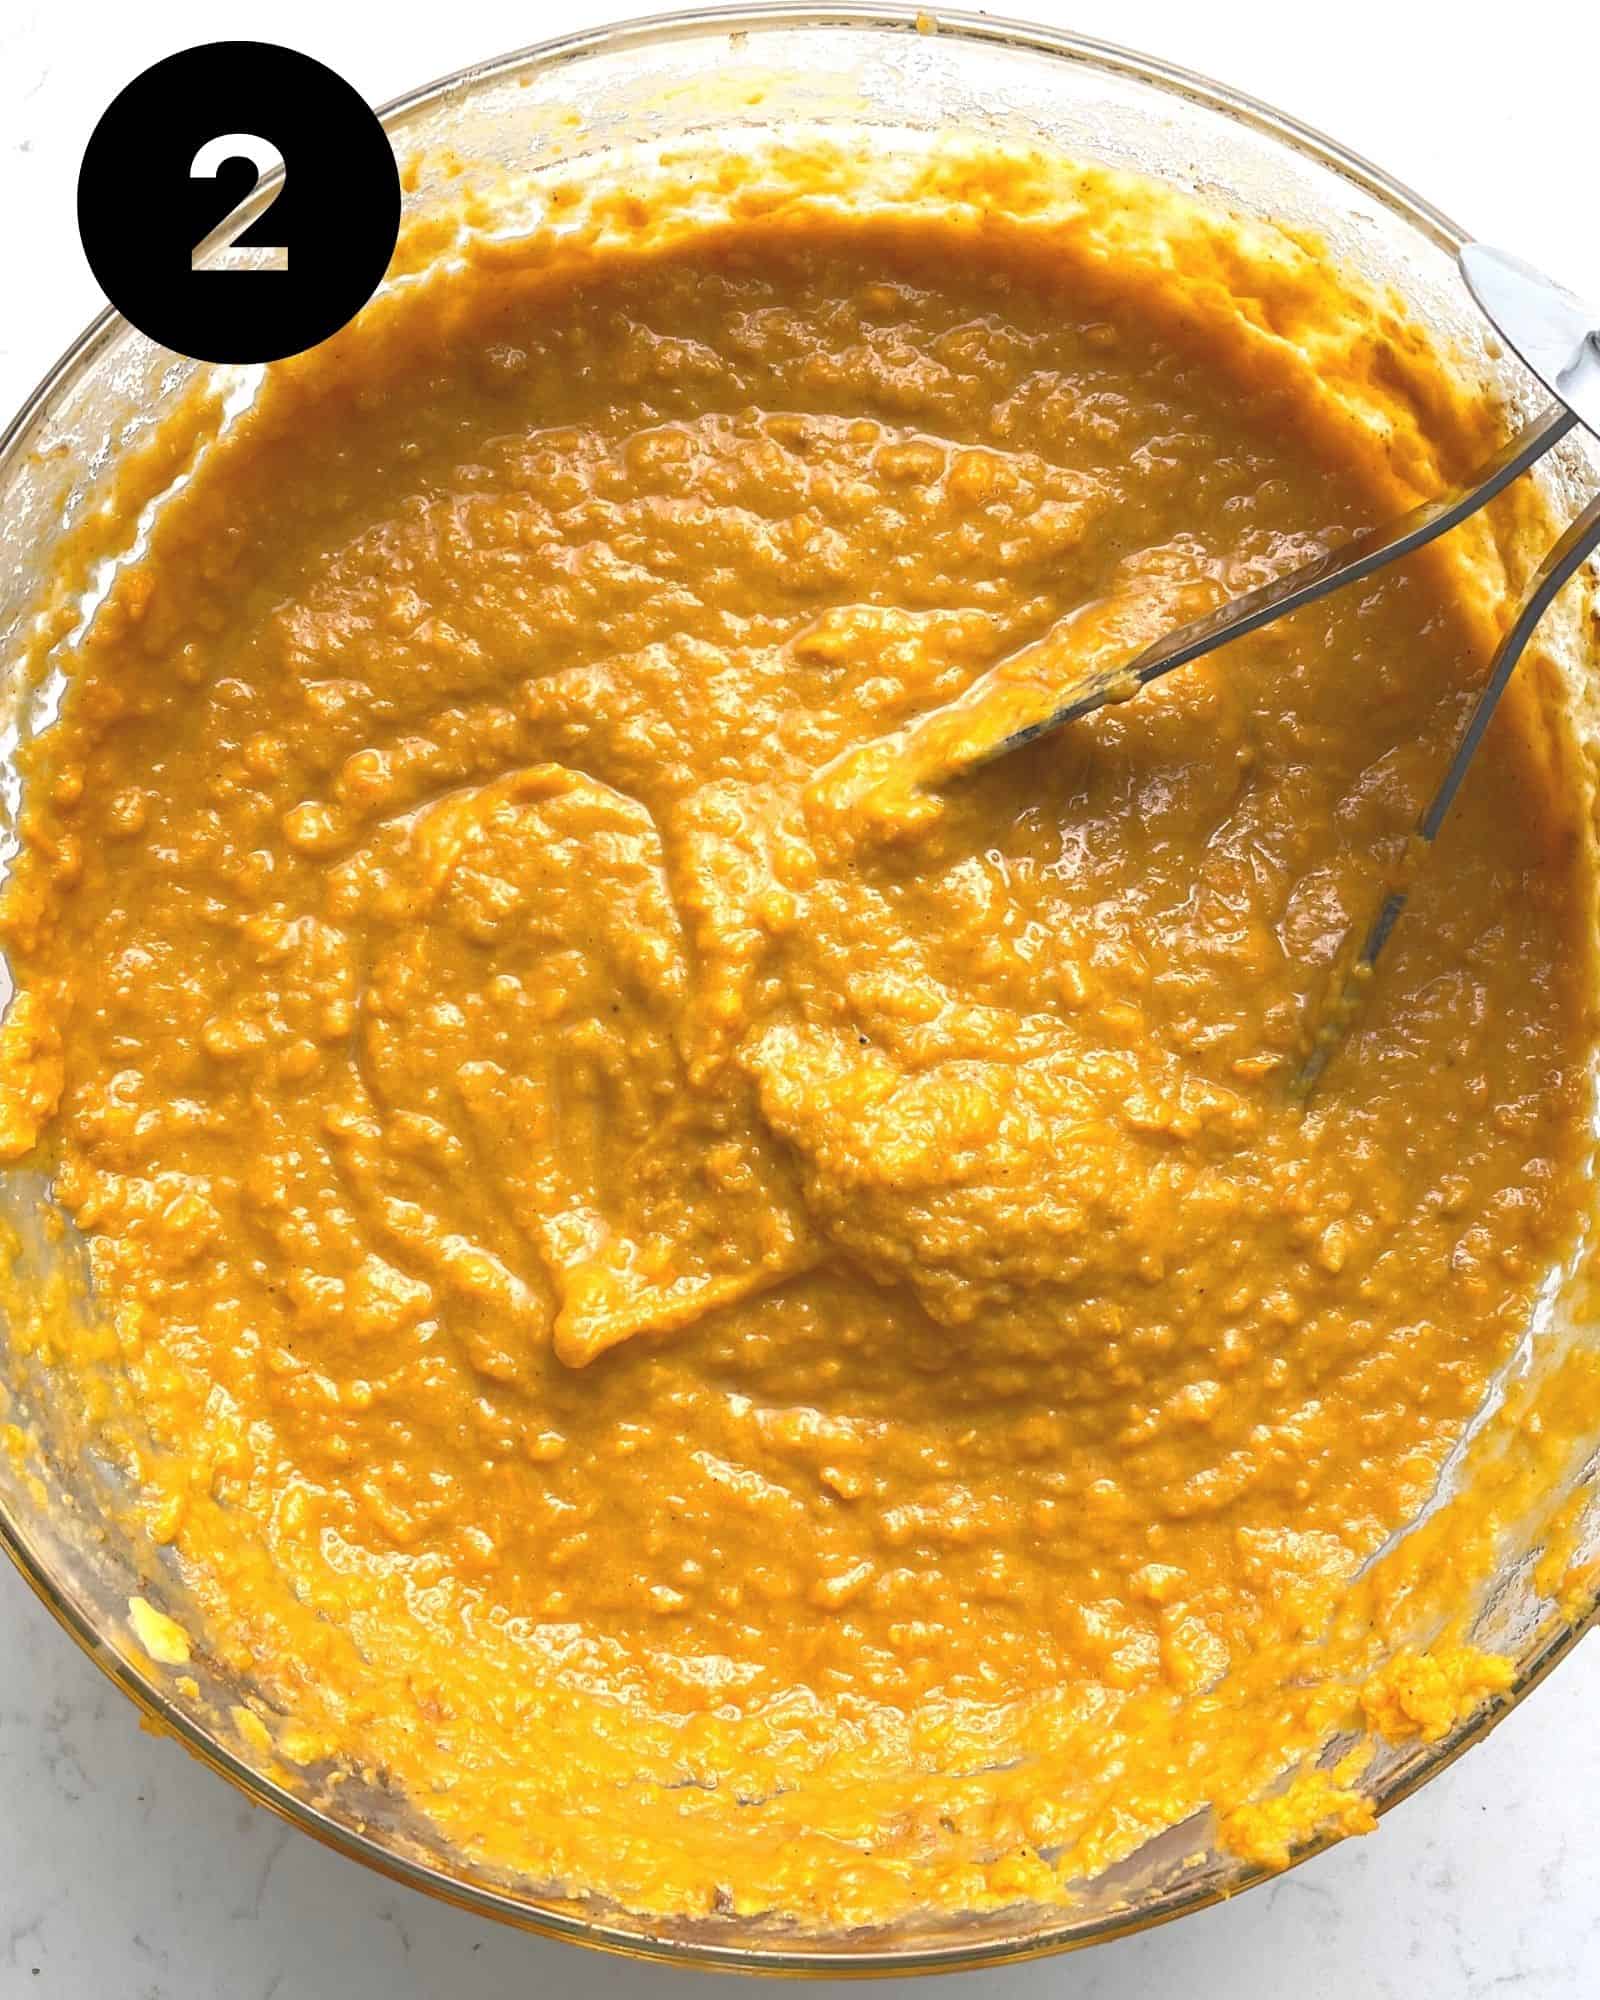 mashed sweet potatoes in a bowl.